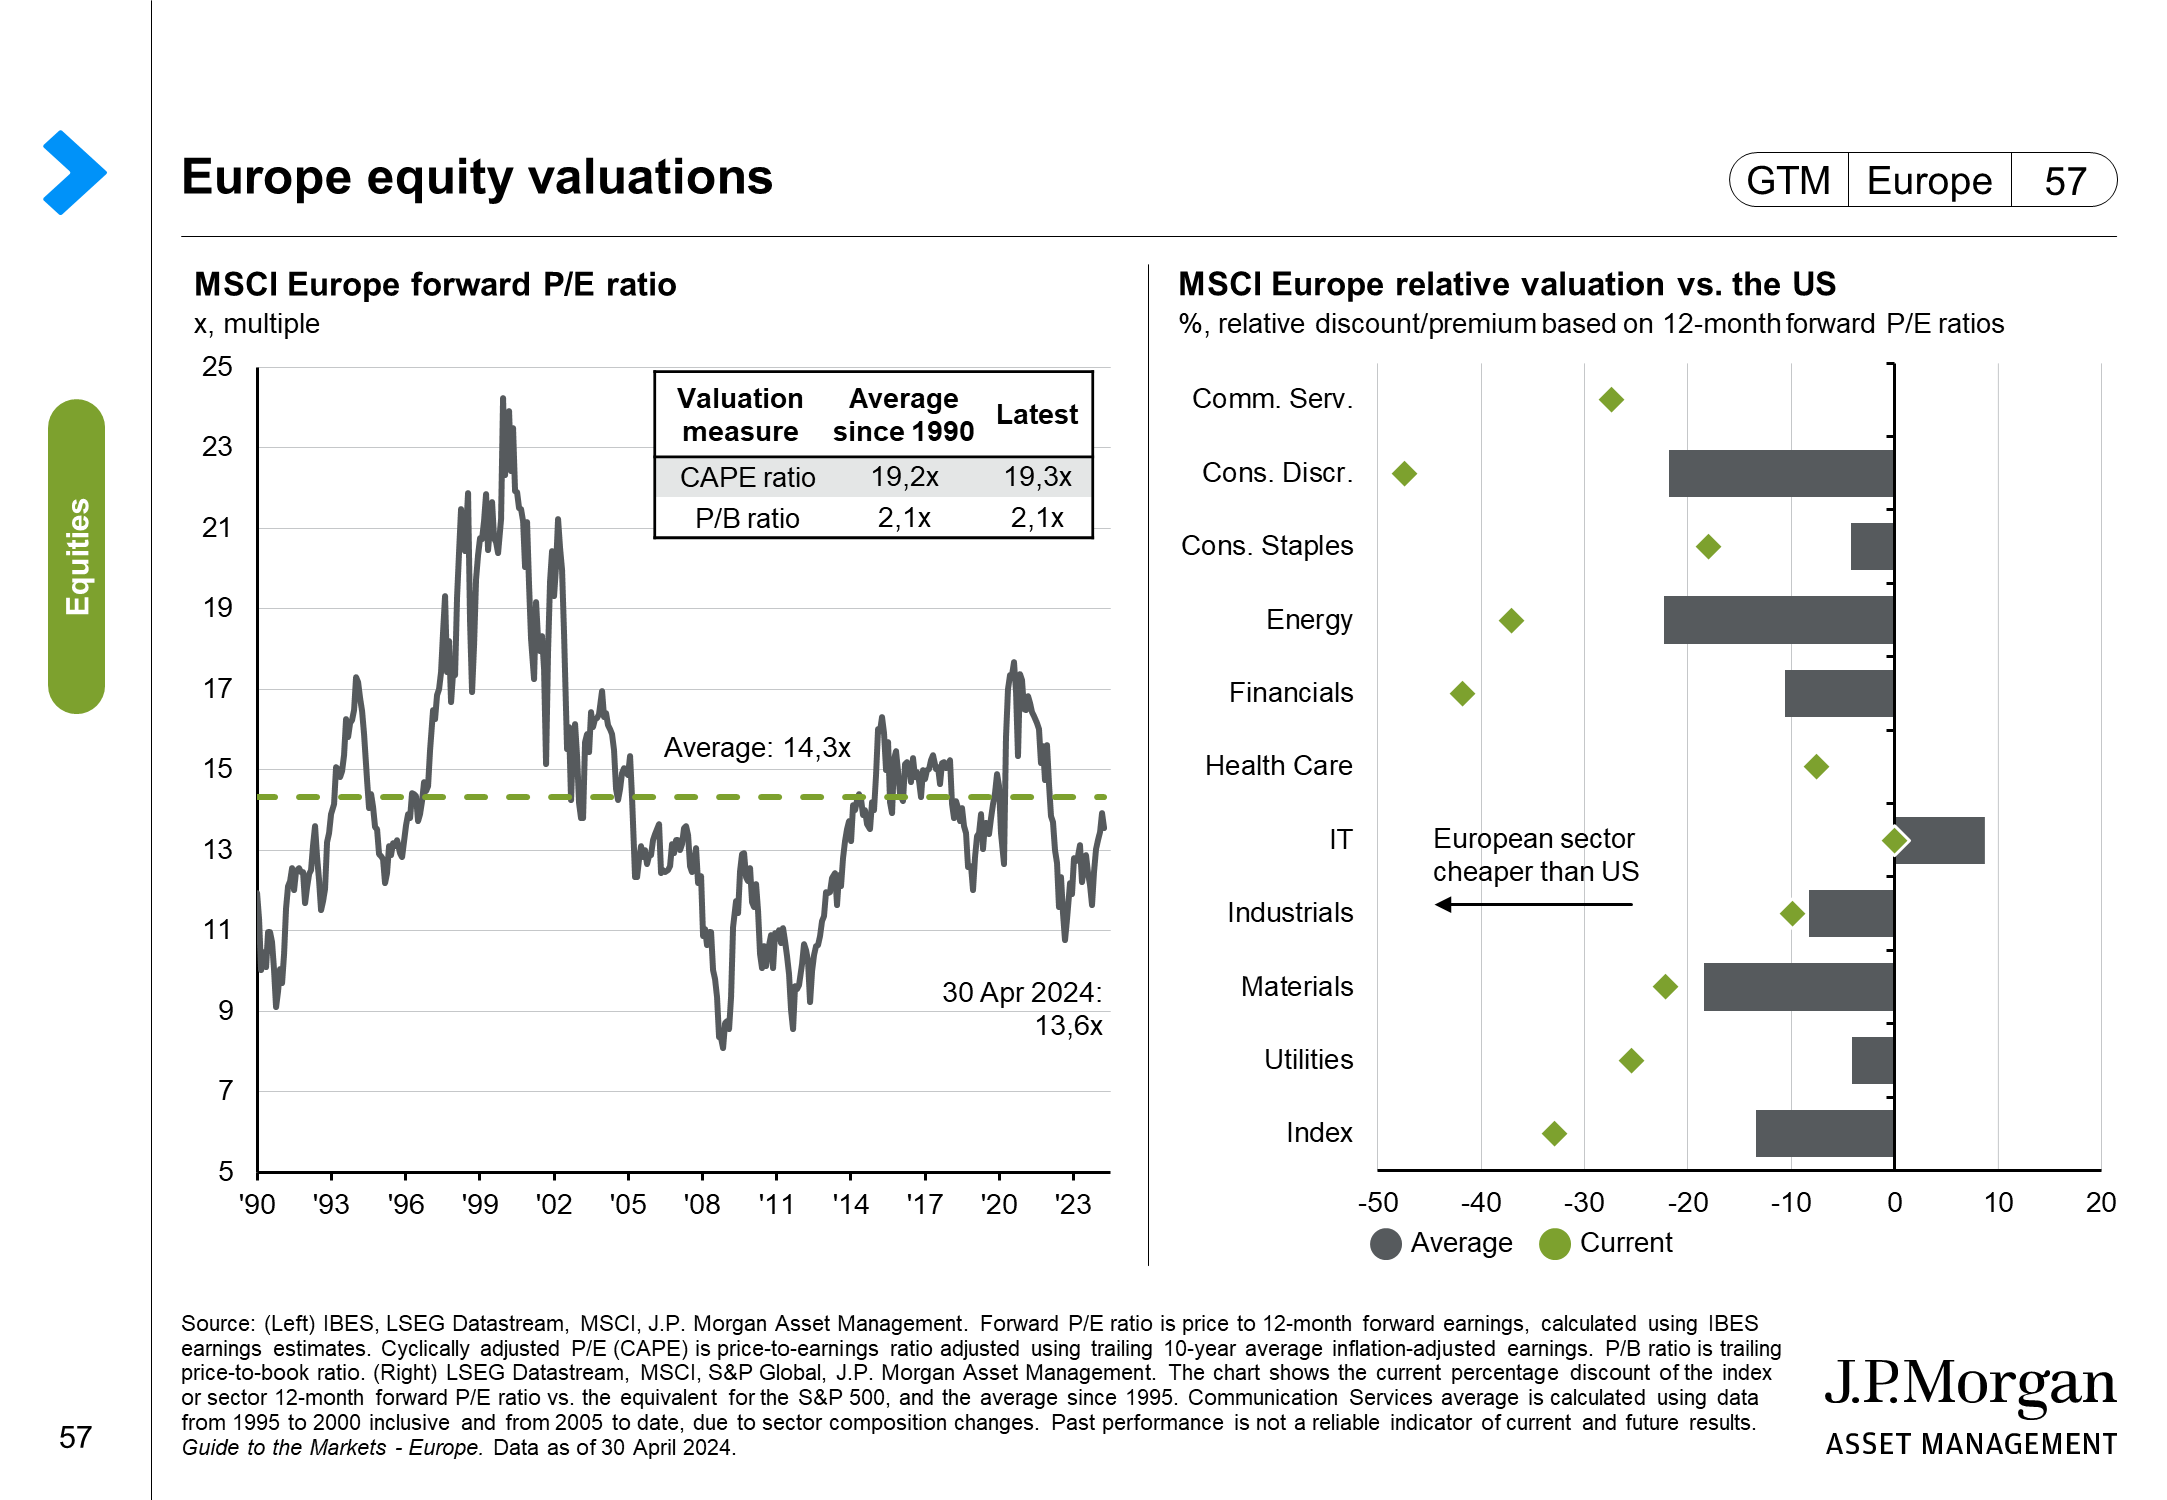 Europe equity valuations and performance